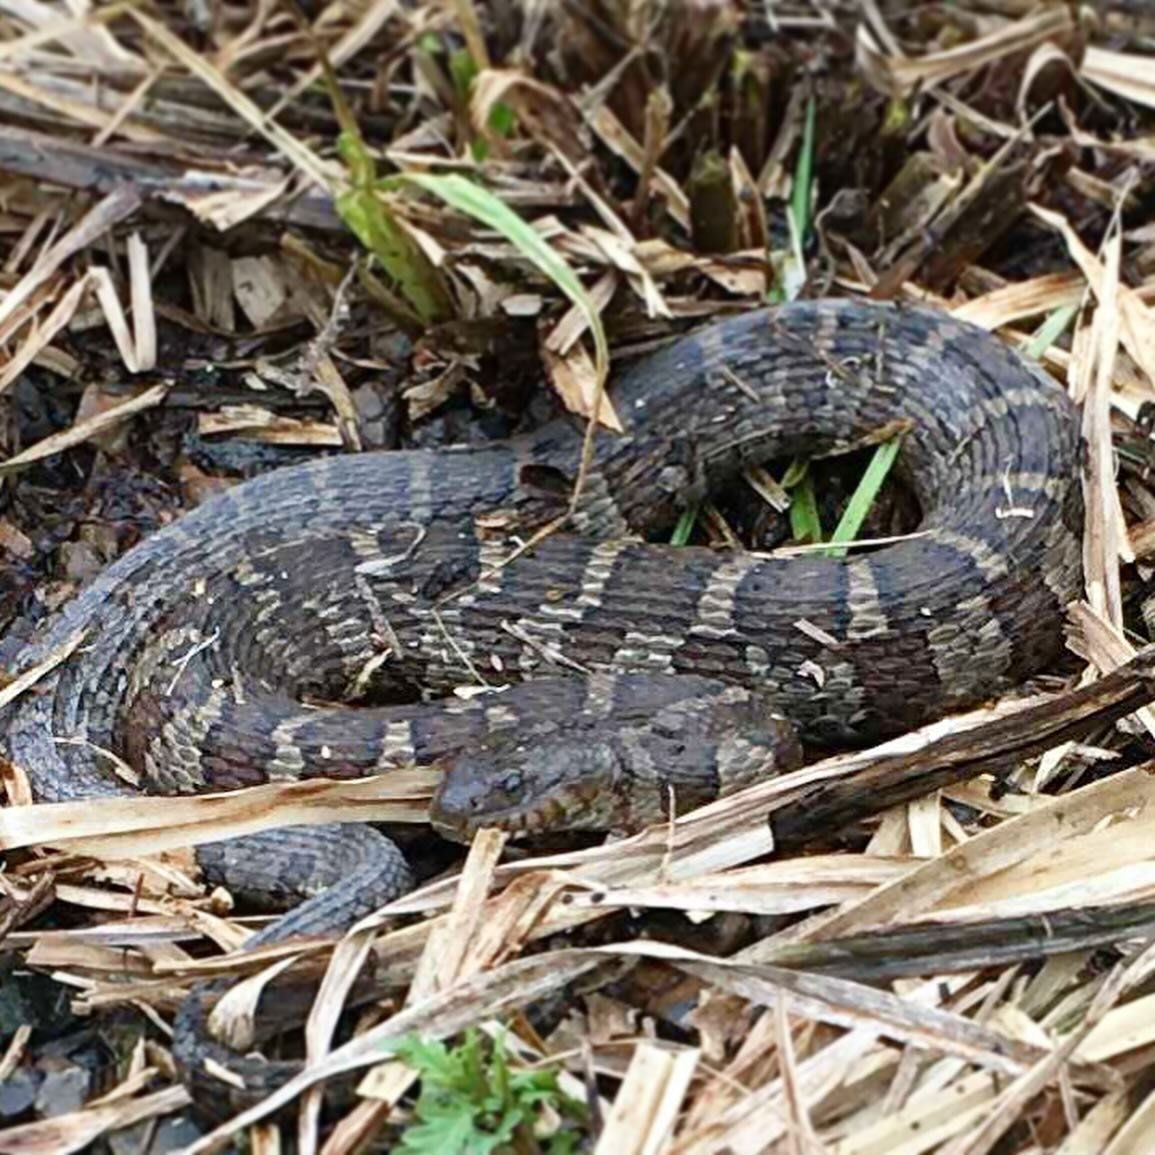 A northern water snake was seen cozying up on our Bubbly Creek gardens during our spring maintenance! Later, @redbreastedsapsucker spotted two northern water snakes mating in the river-edge  trees across from Bubbly Creek. These exciting observations